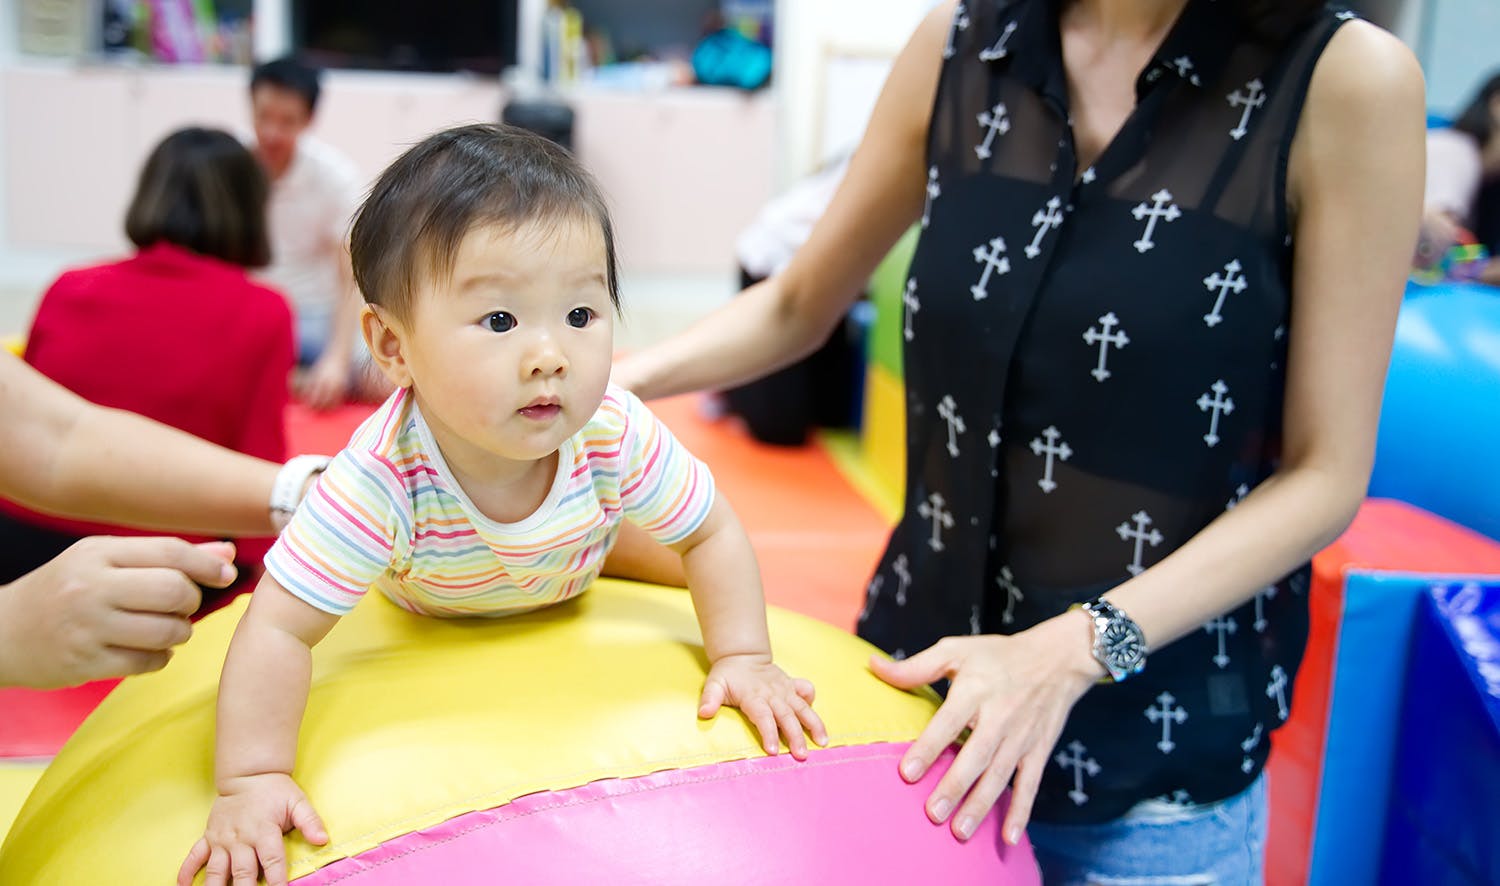 A mother assisting her toddler on soft play equipment